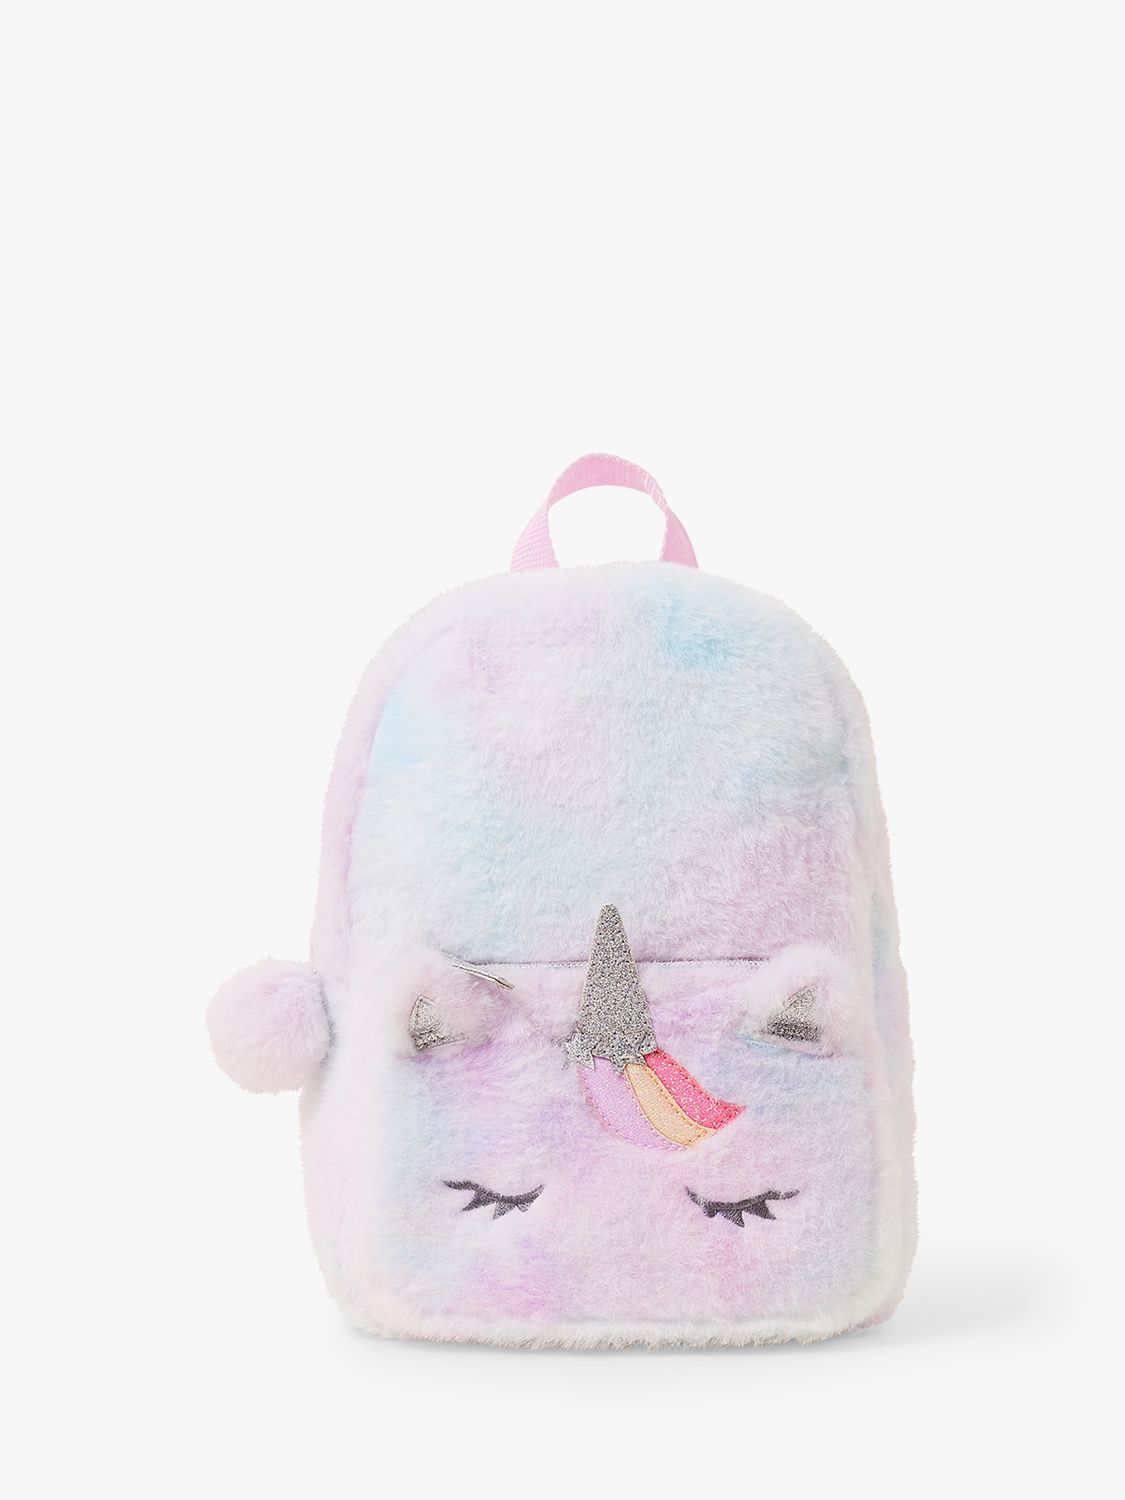 Angels by Accessorize Kids' Fluffy Unicorn Backpack, Multi, One Size